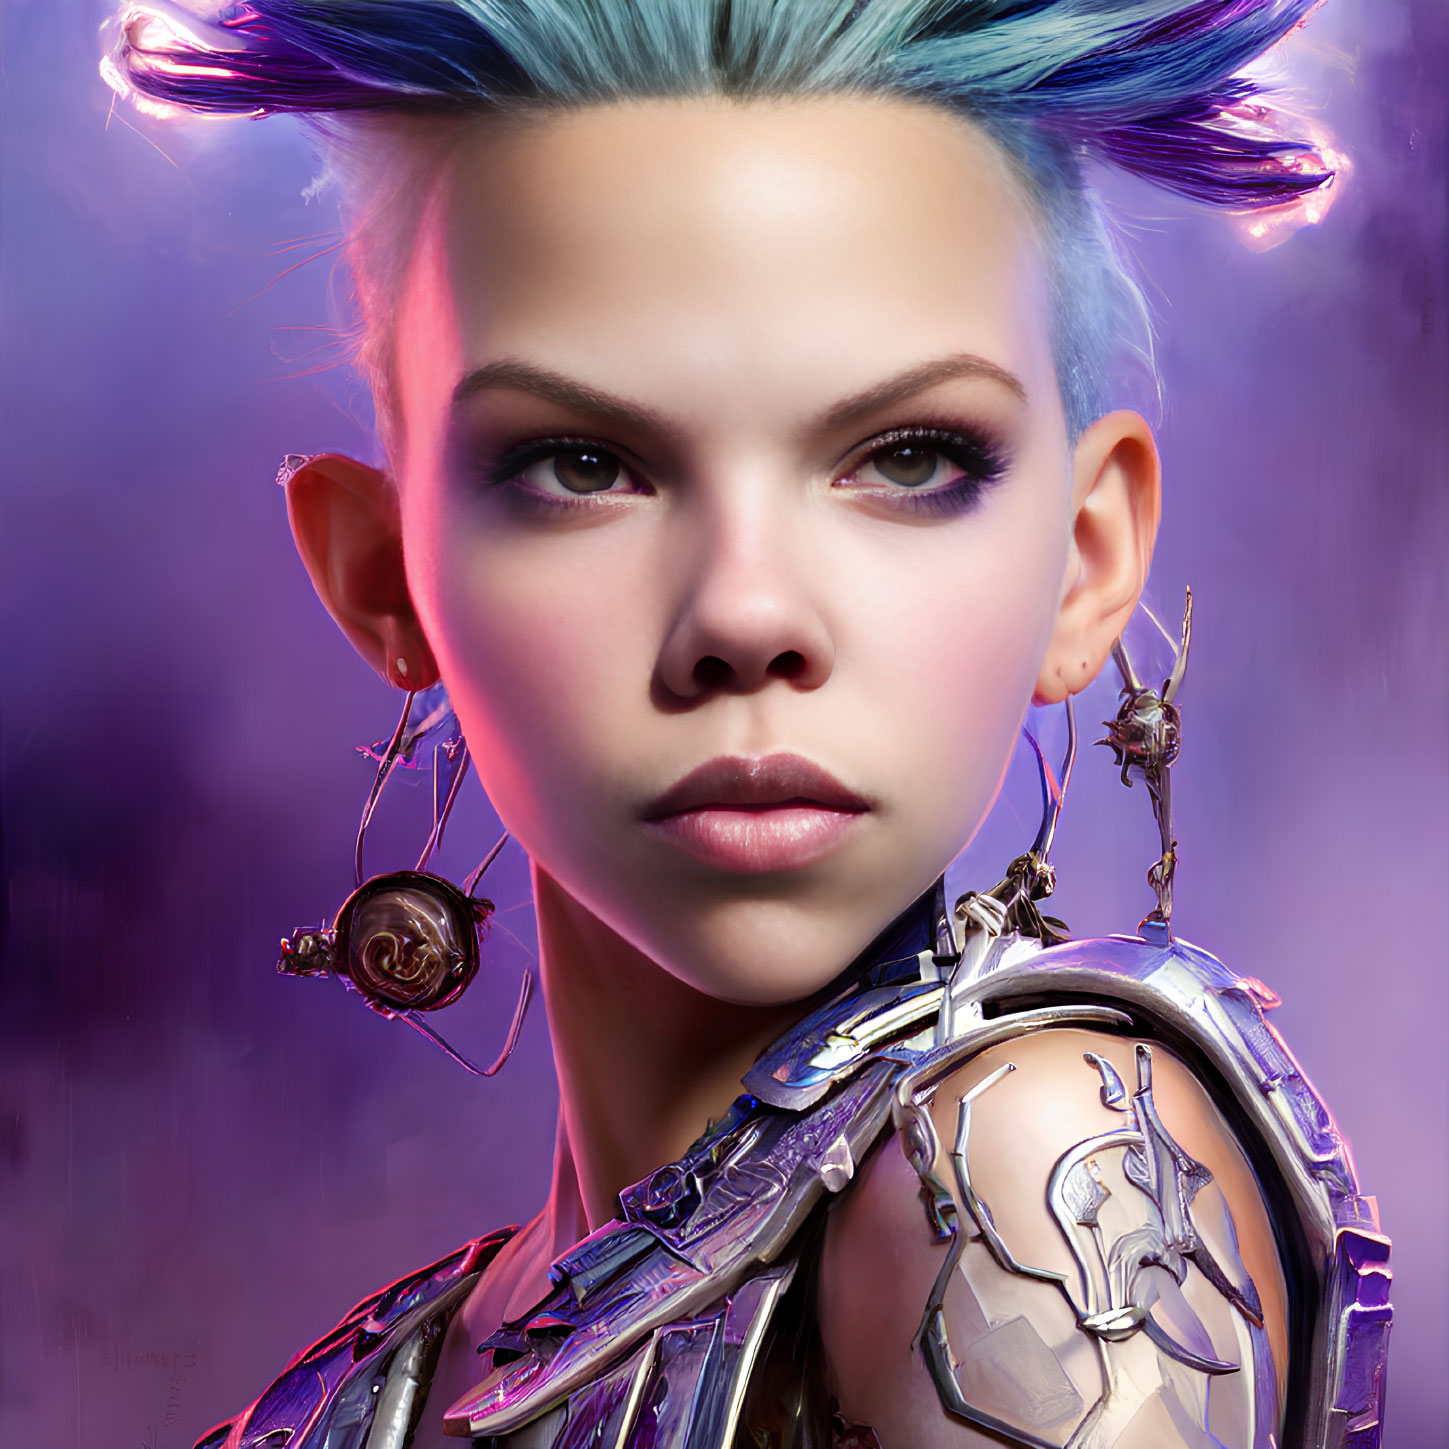 Digital Artwork: Woman with Blue Spiked Hair & Futuristic Silver Armor